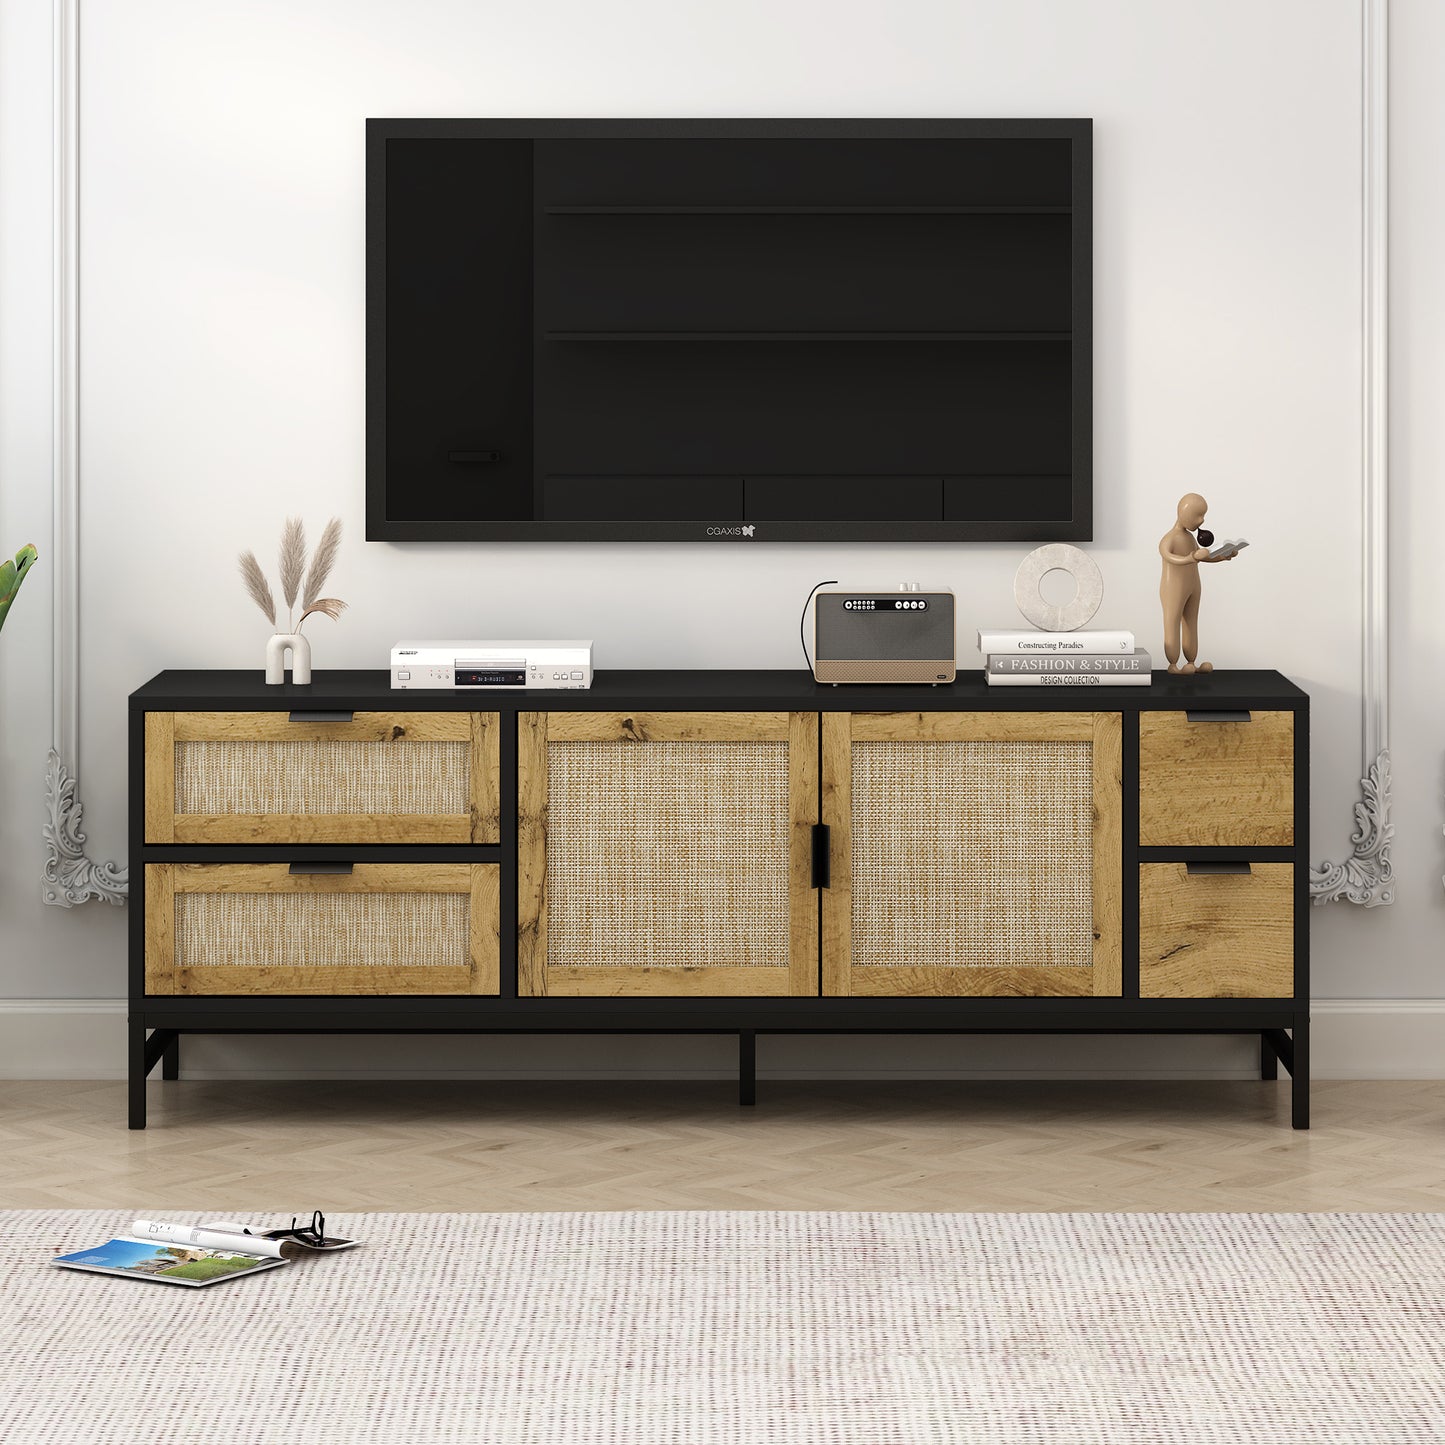 ON-TREND Elegant Rattan TV Stand for TVs up to 65", Boho Style Media Console with Adjustable Shelves, Sleek TV Console Table with Wood Grain Surface for Living Room, Steel Grey